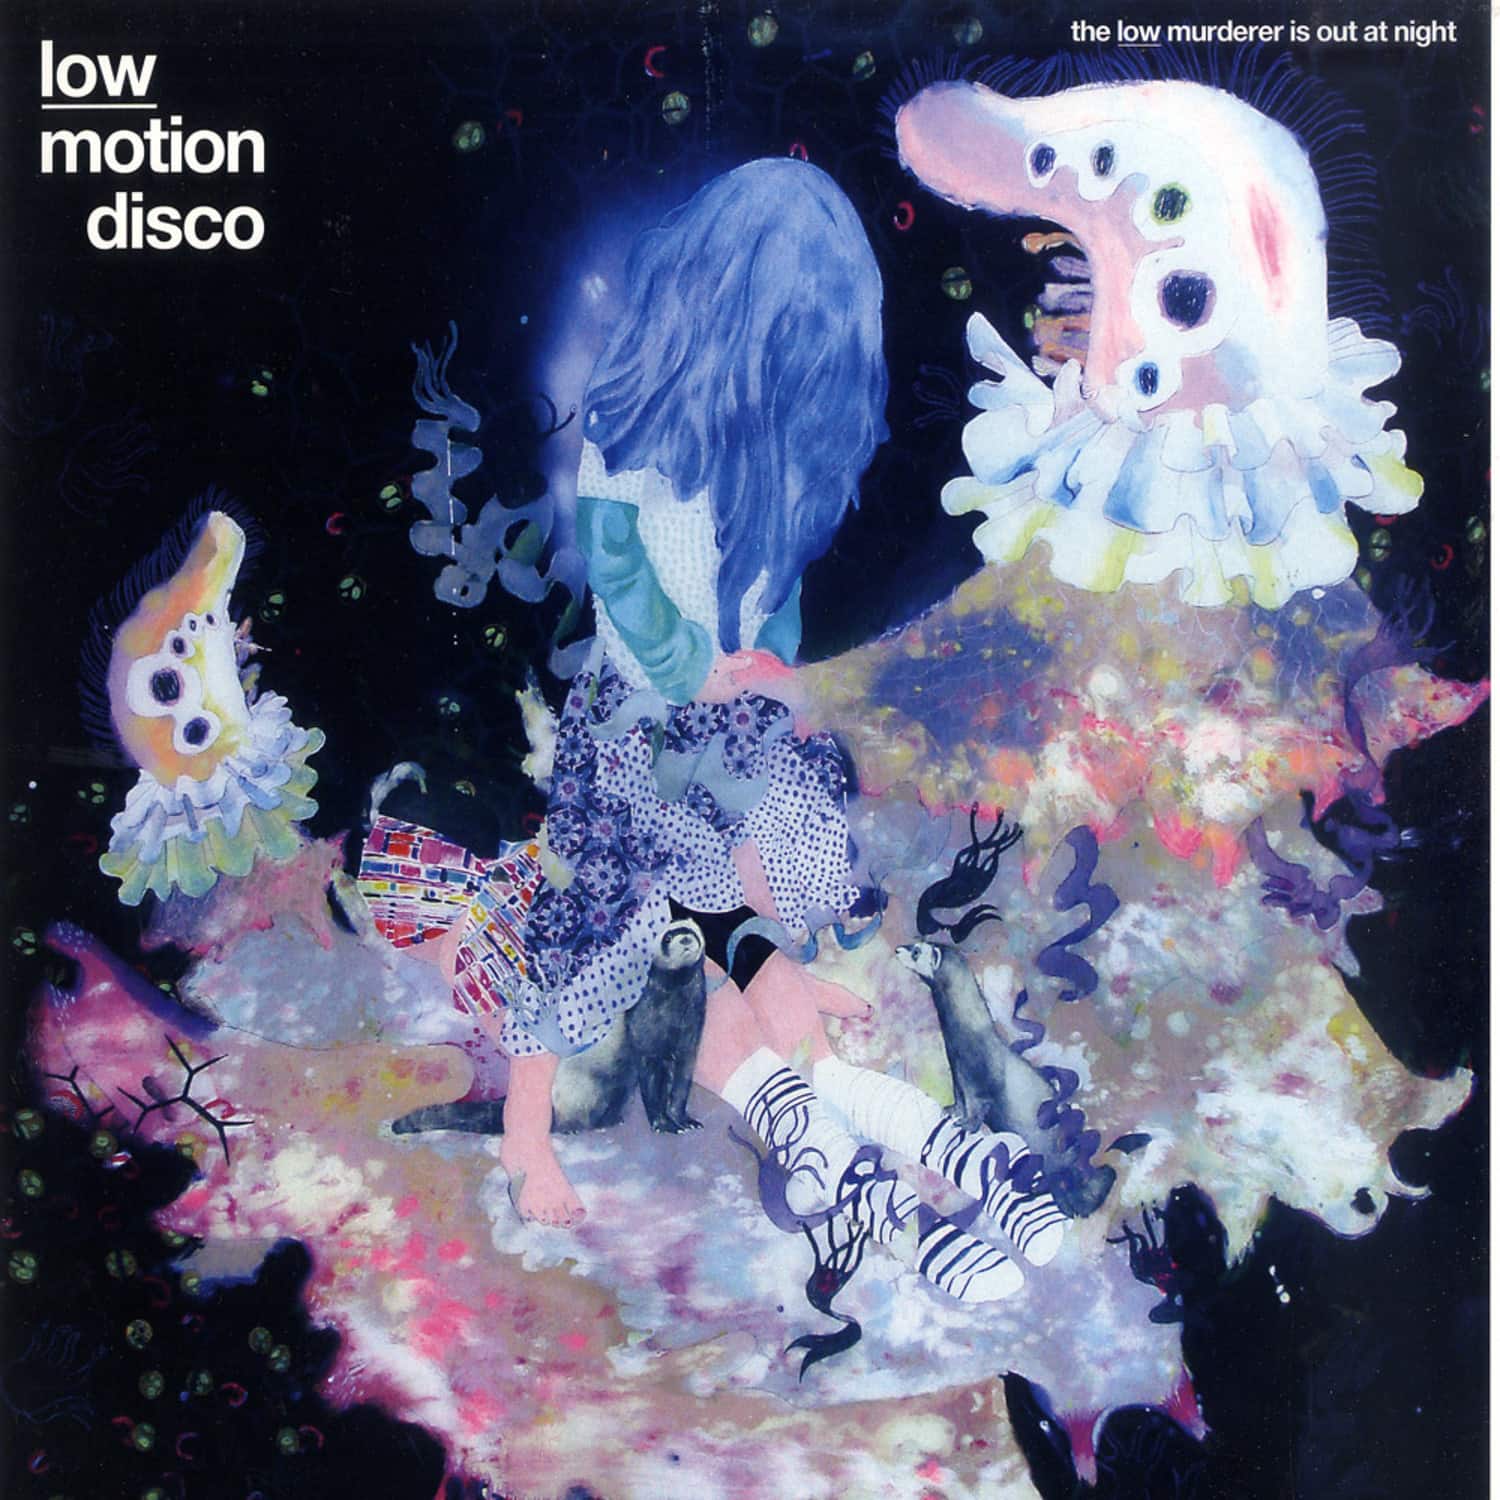 Low Motion Disco - THE LOW MURDERER IS OUT AT NIGHT